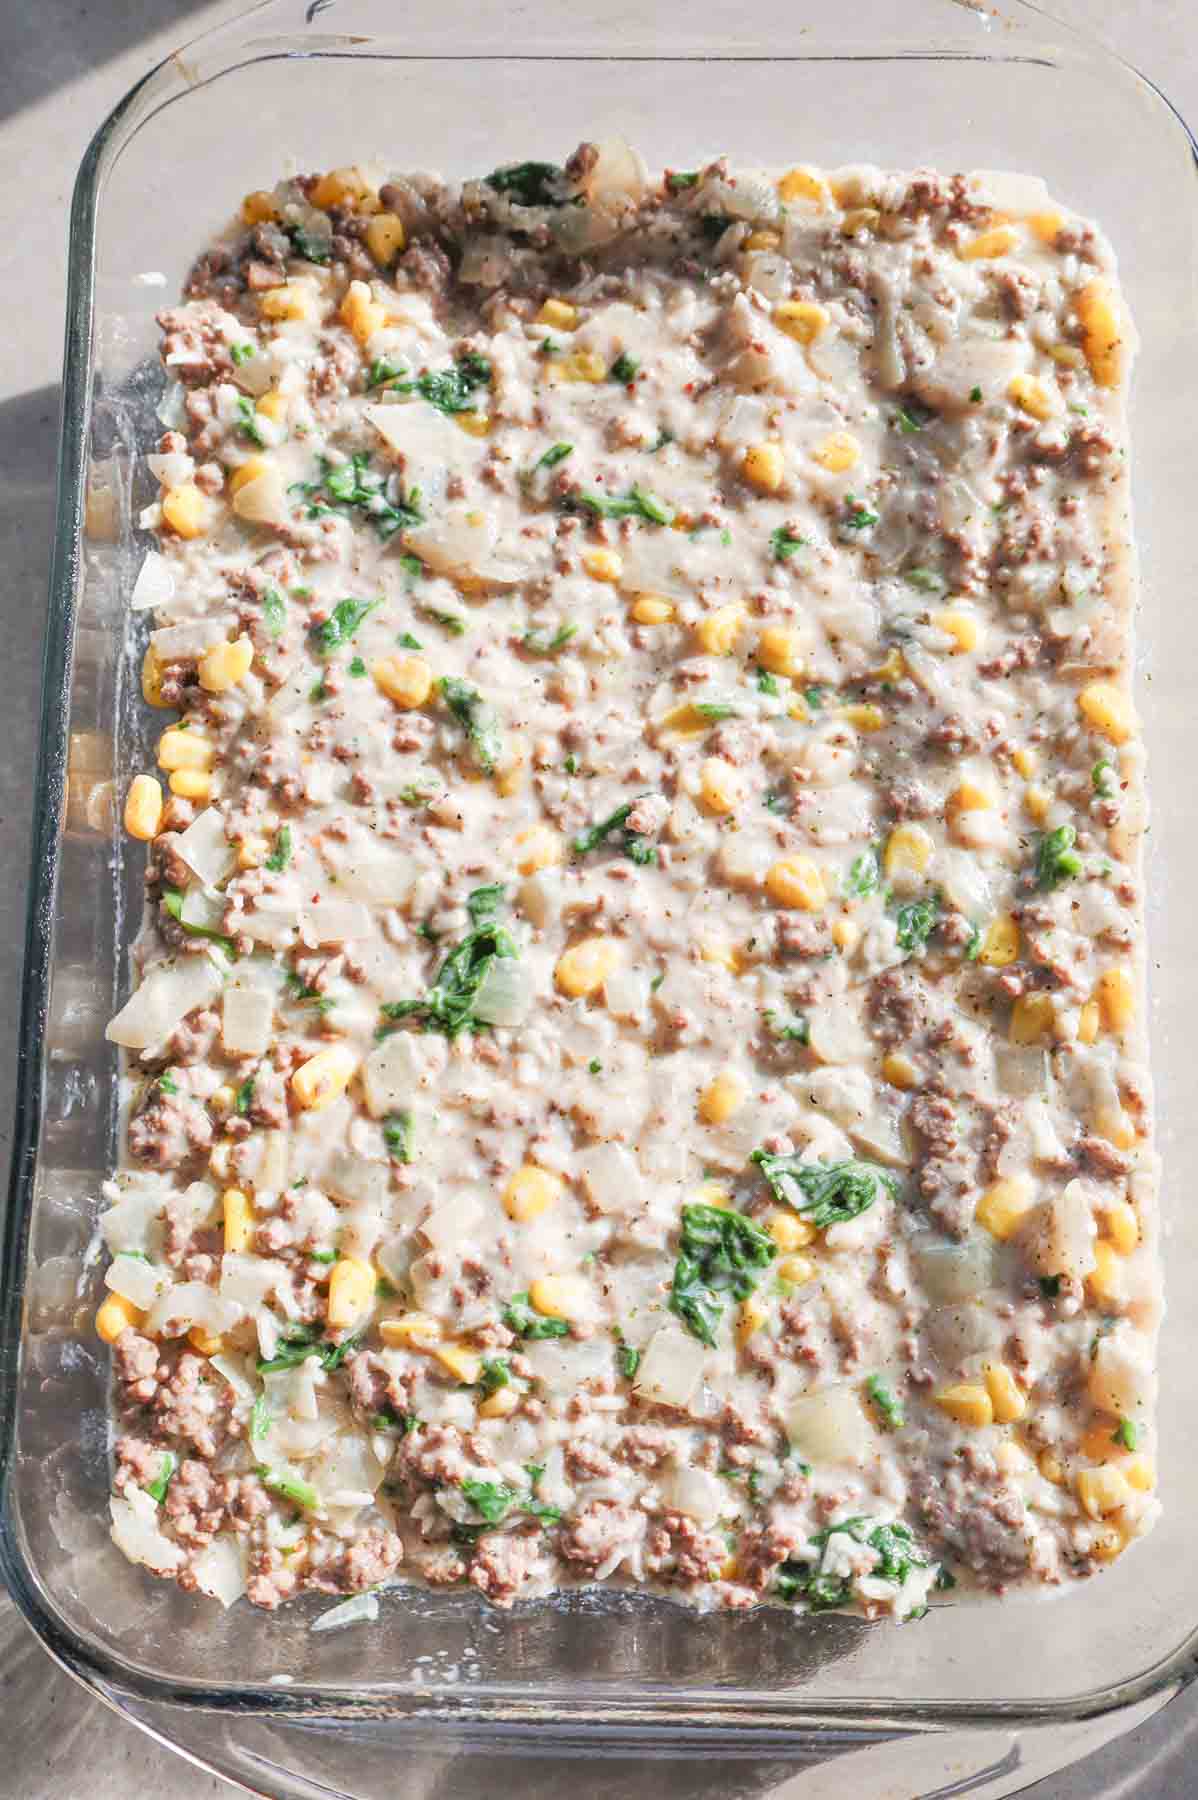 creamy ground beef, rice and vegetable mixture in a baking dish